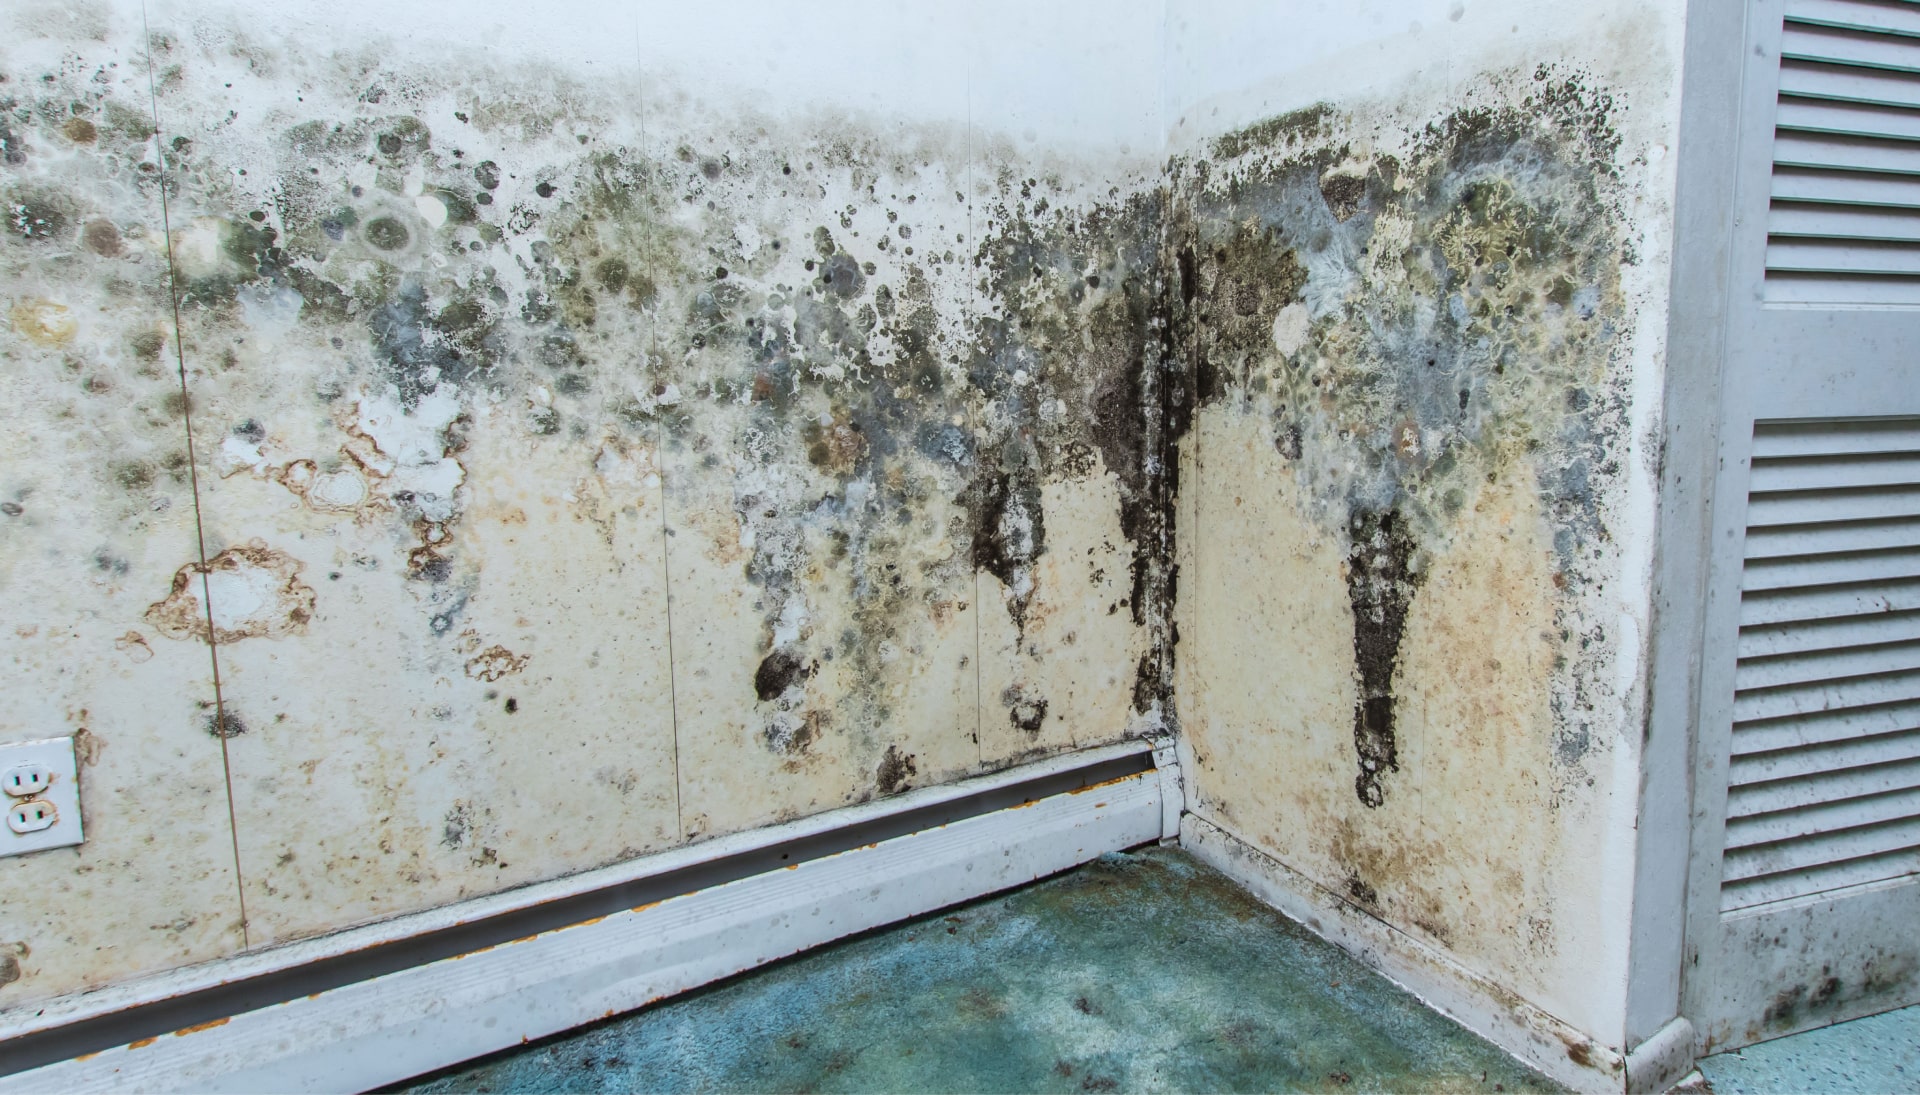 A mold remediation team using specialized techniques to remove mold damage and control odors in a Memphis property, with a focus on safety and efficiency